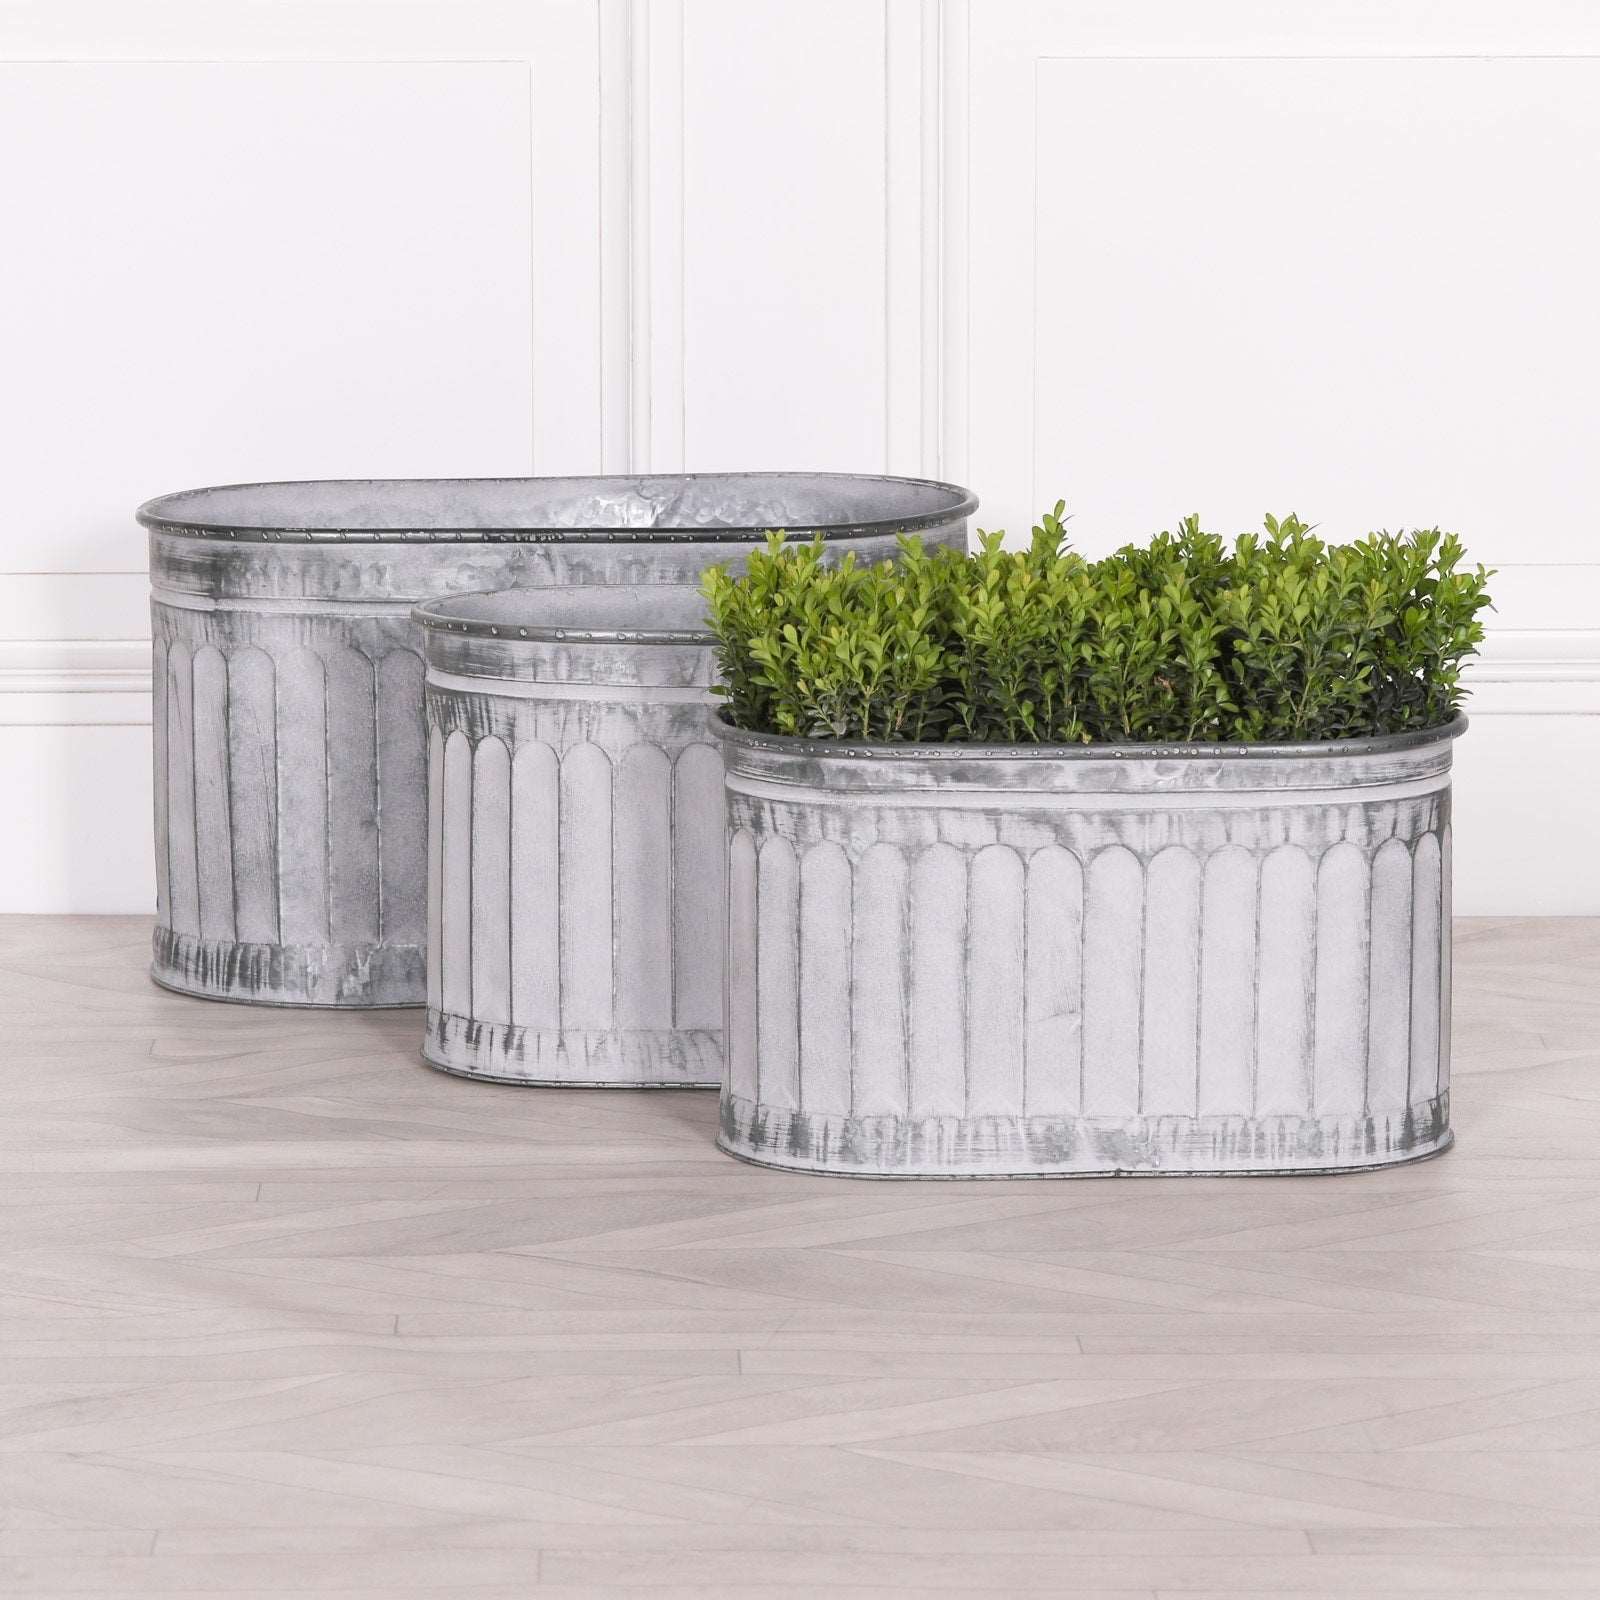 Arched Pattern Metal Planter - Small